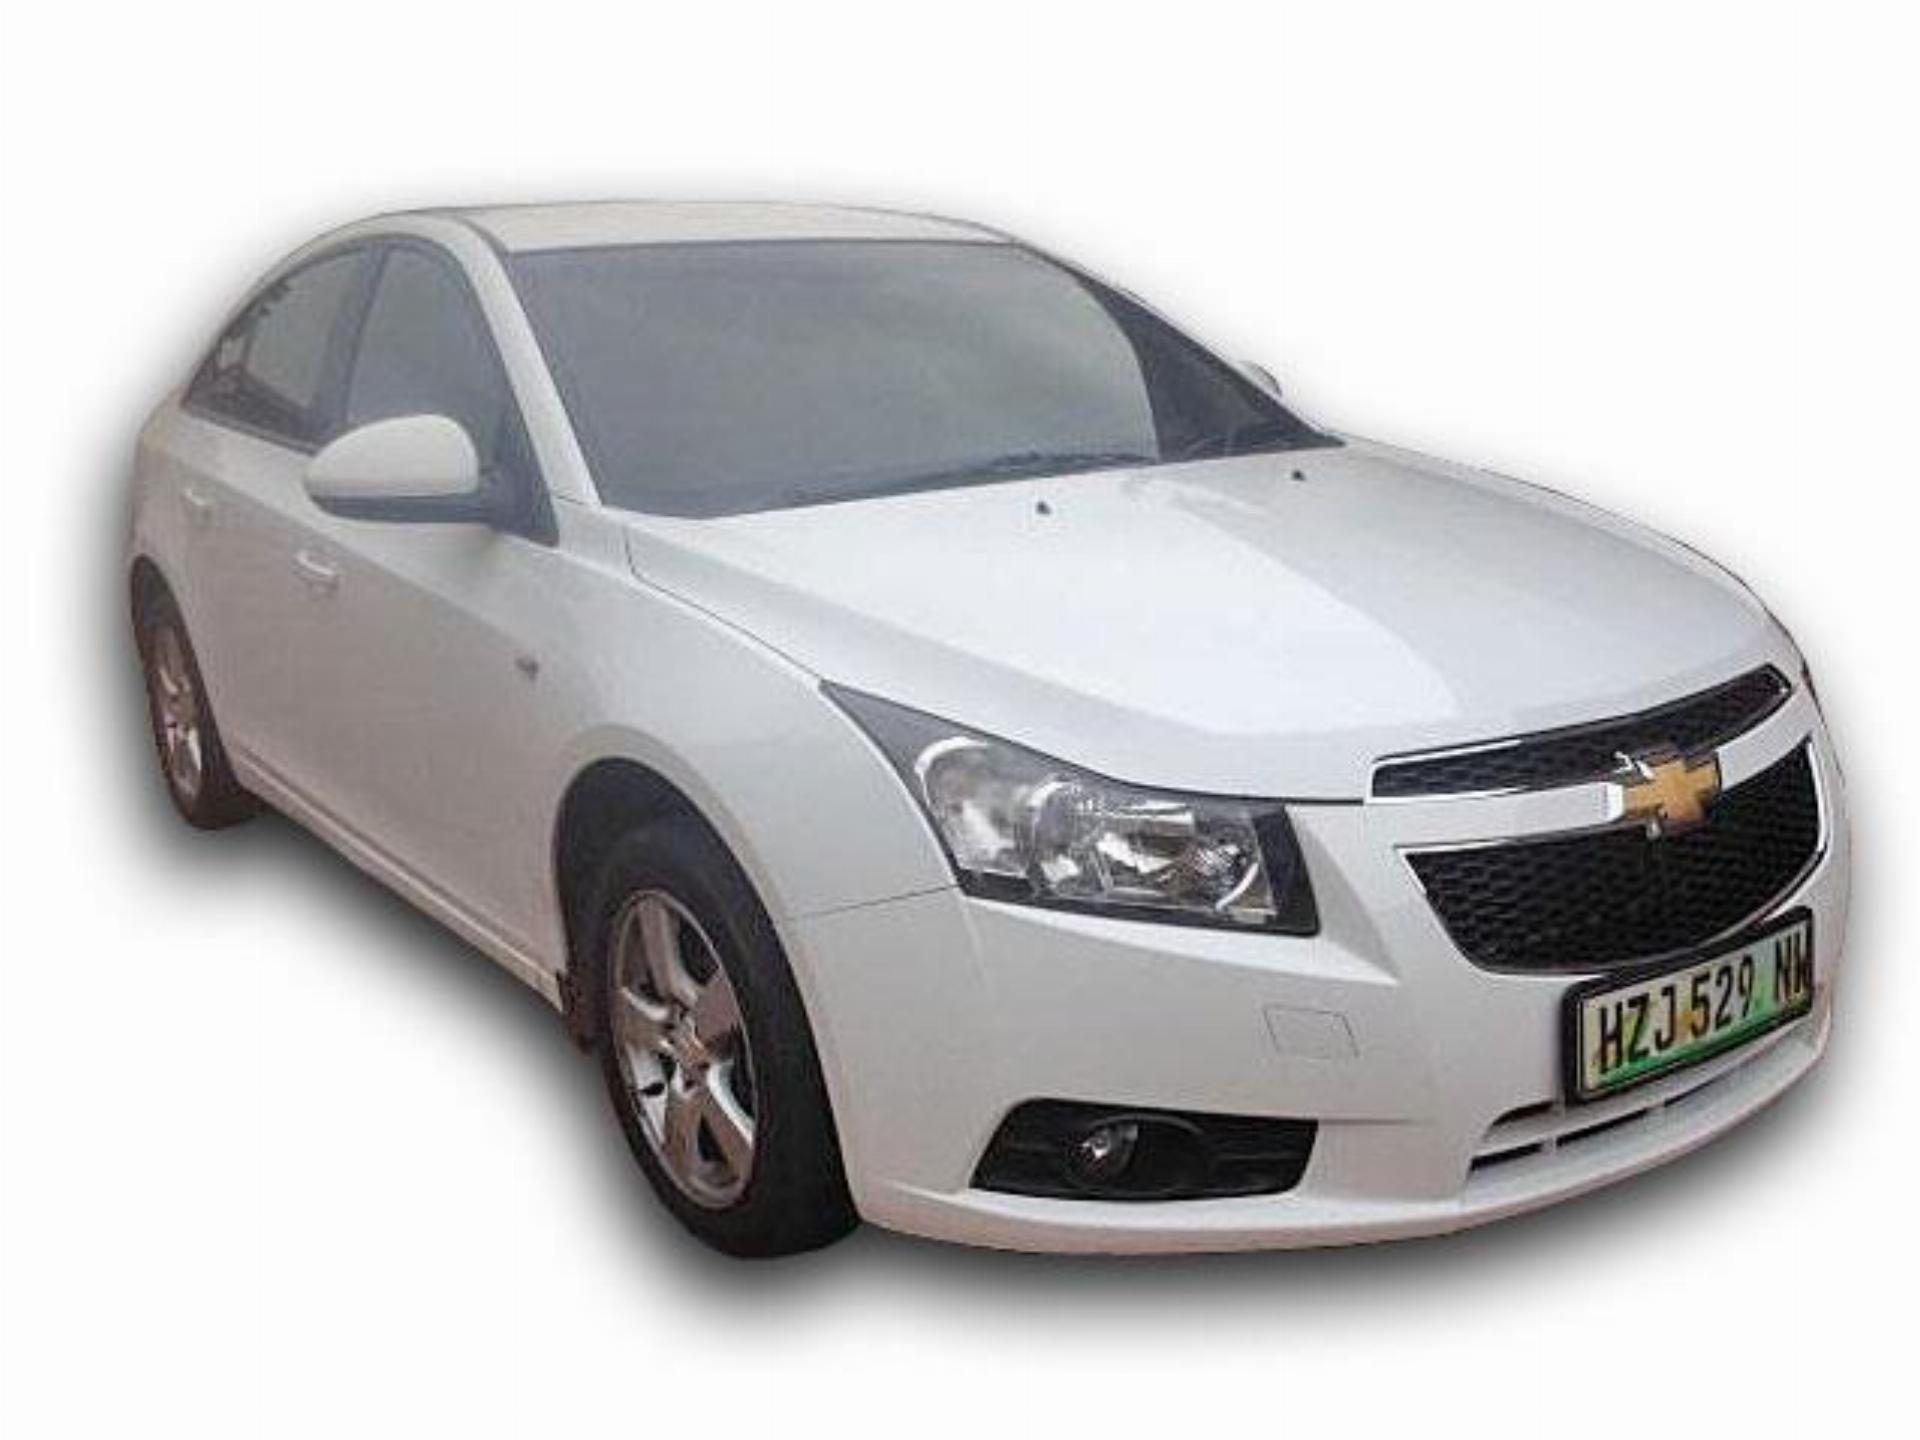 Used Chevrolet Cruze 1.8 LS 5DR 2011 on auction PV1021035